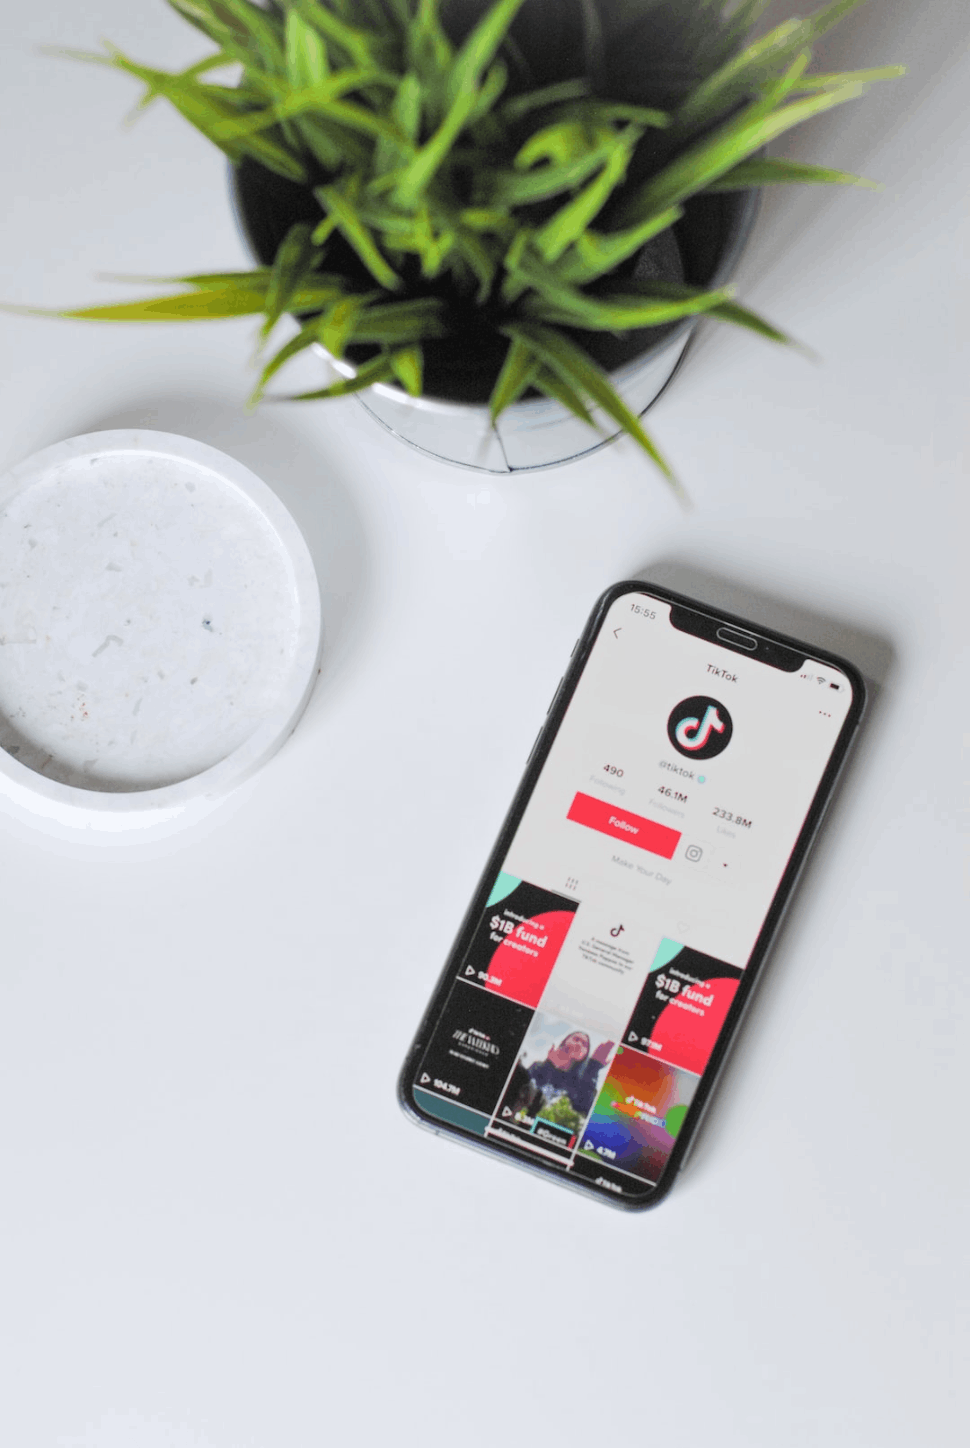 TikTok's New Feature: Focus on View Campaigns and Increased Brand Visibility